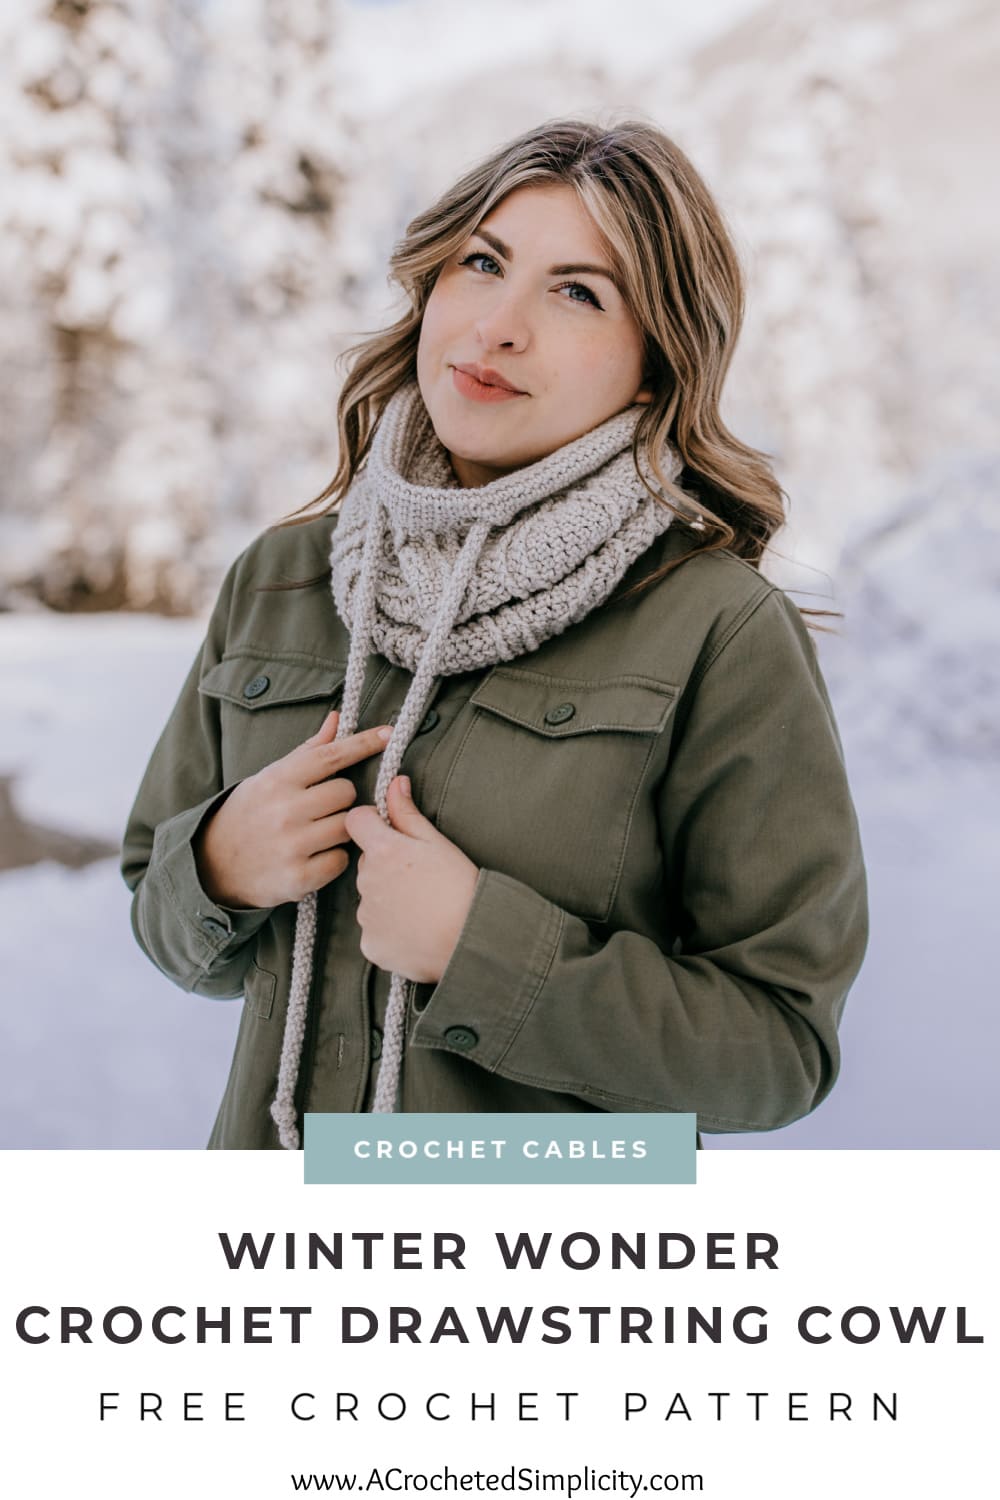 woman modeling crochet drawstring cowl in snowy mountains pinterest image